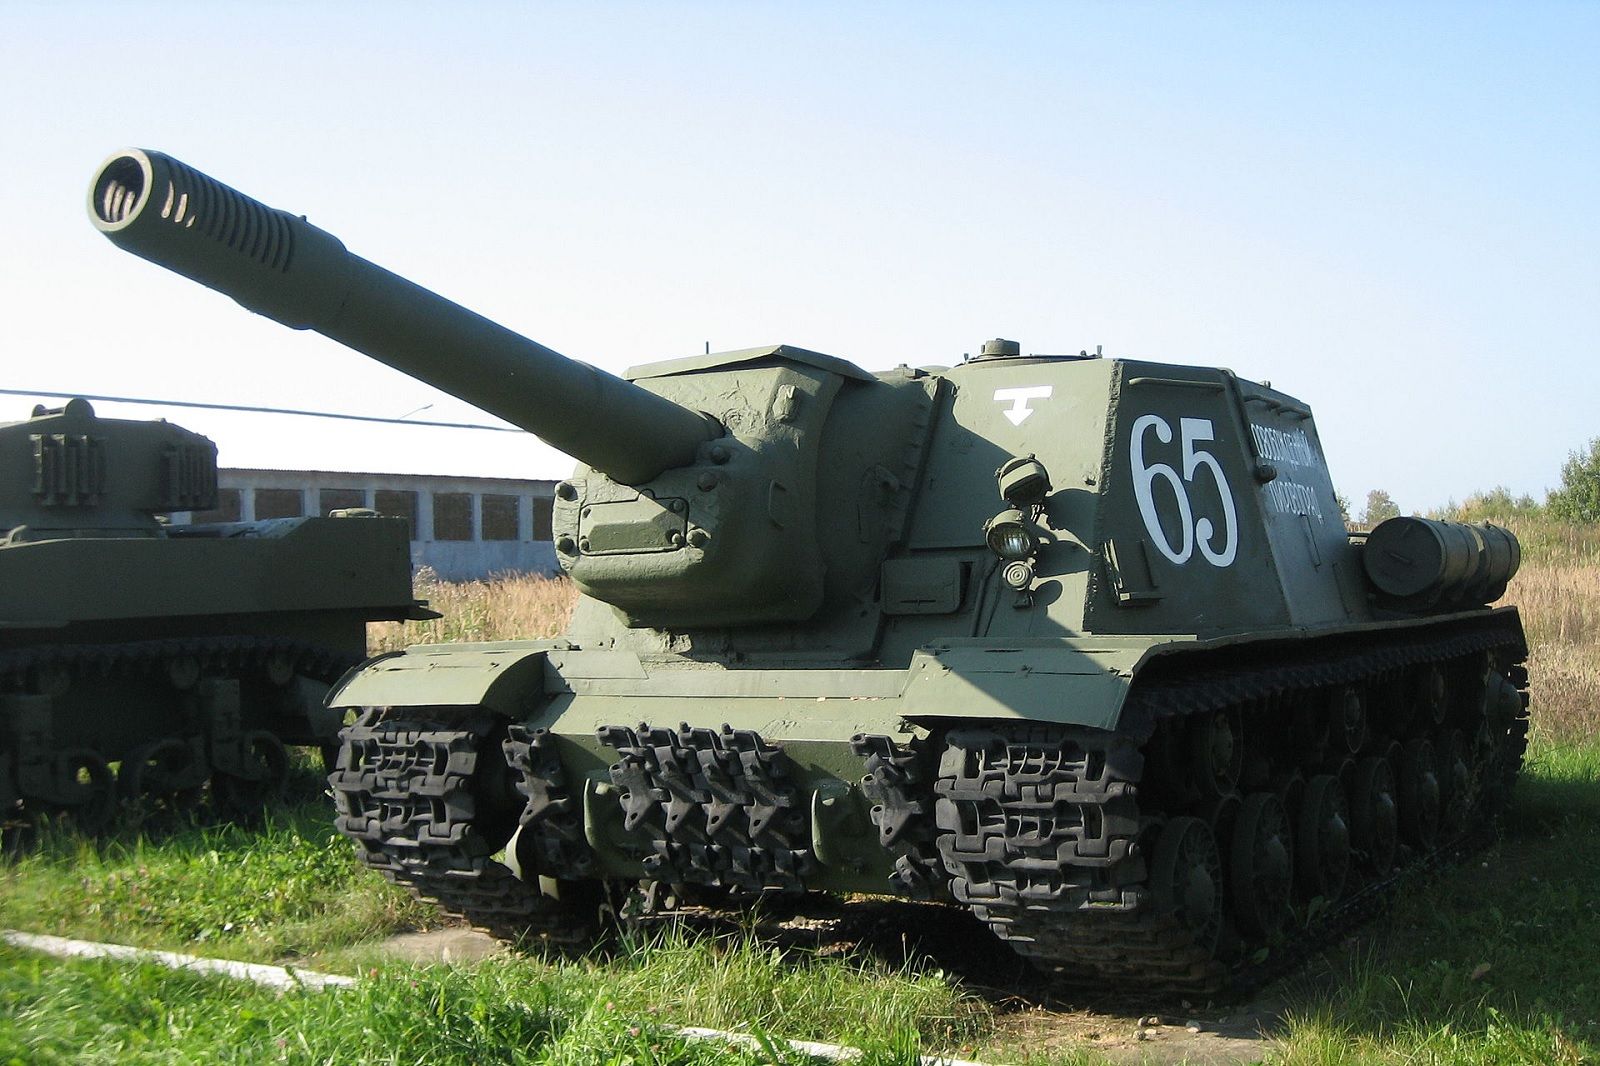 The 10 Best American Tanks Ever Built, Ranked